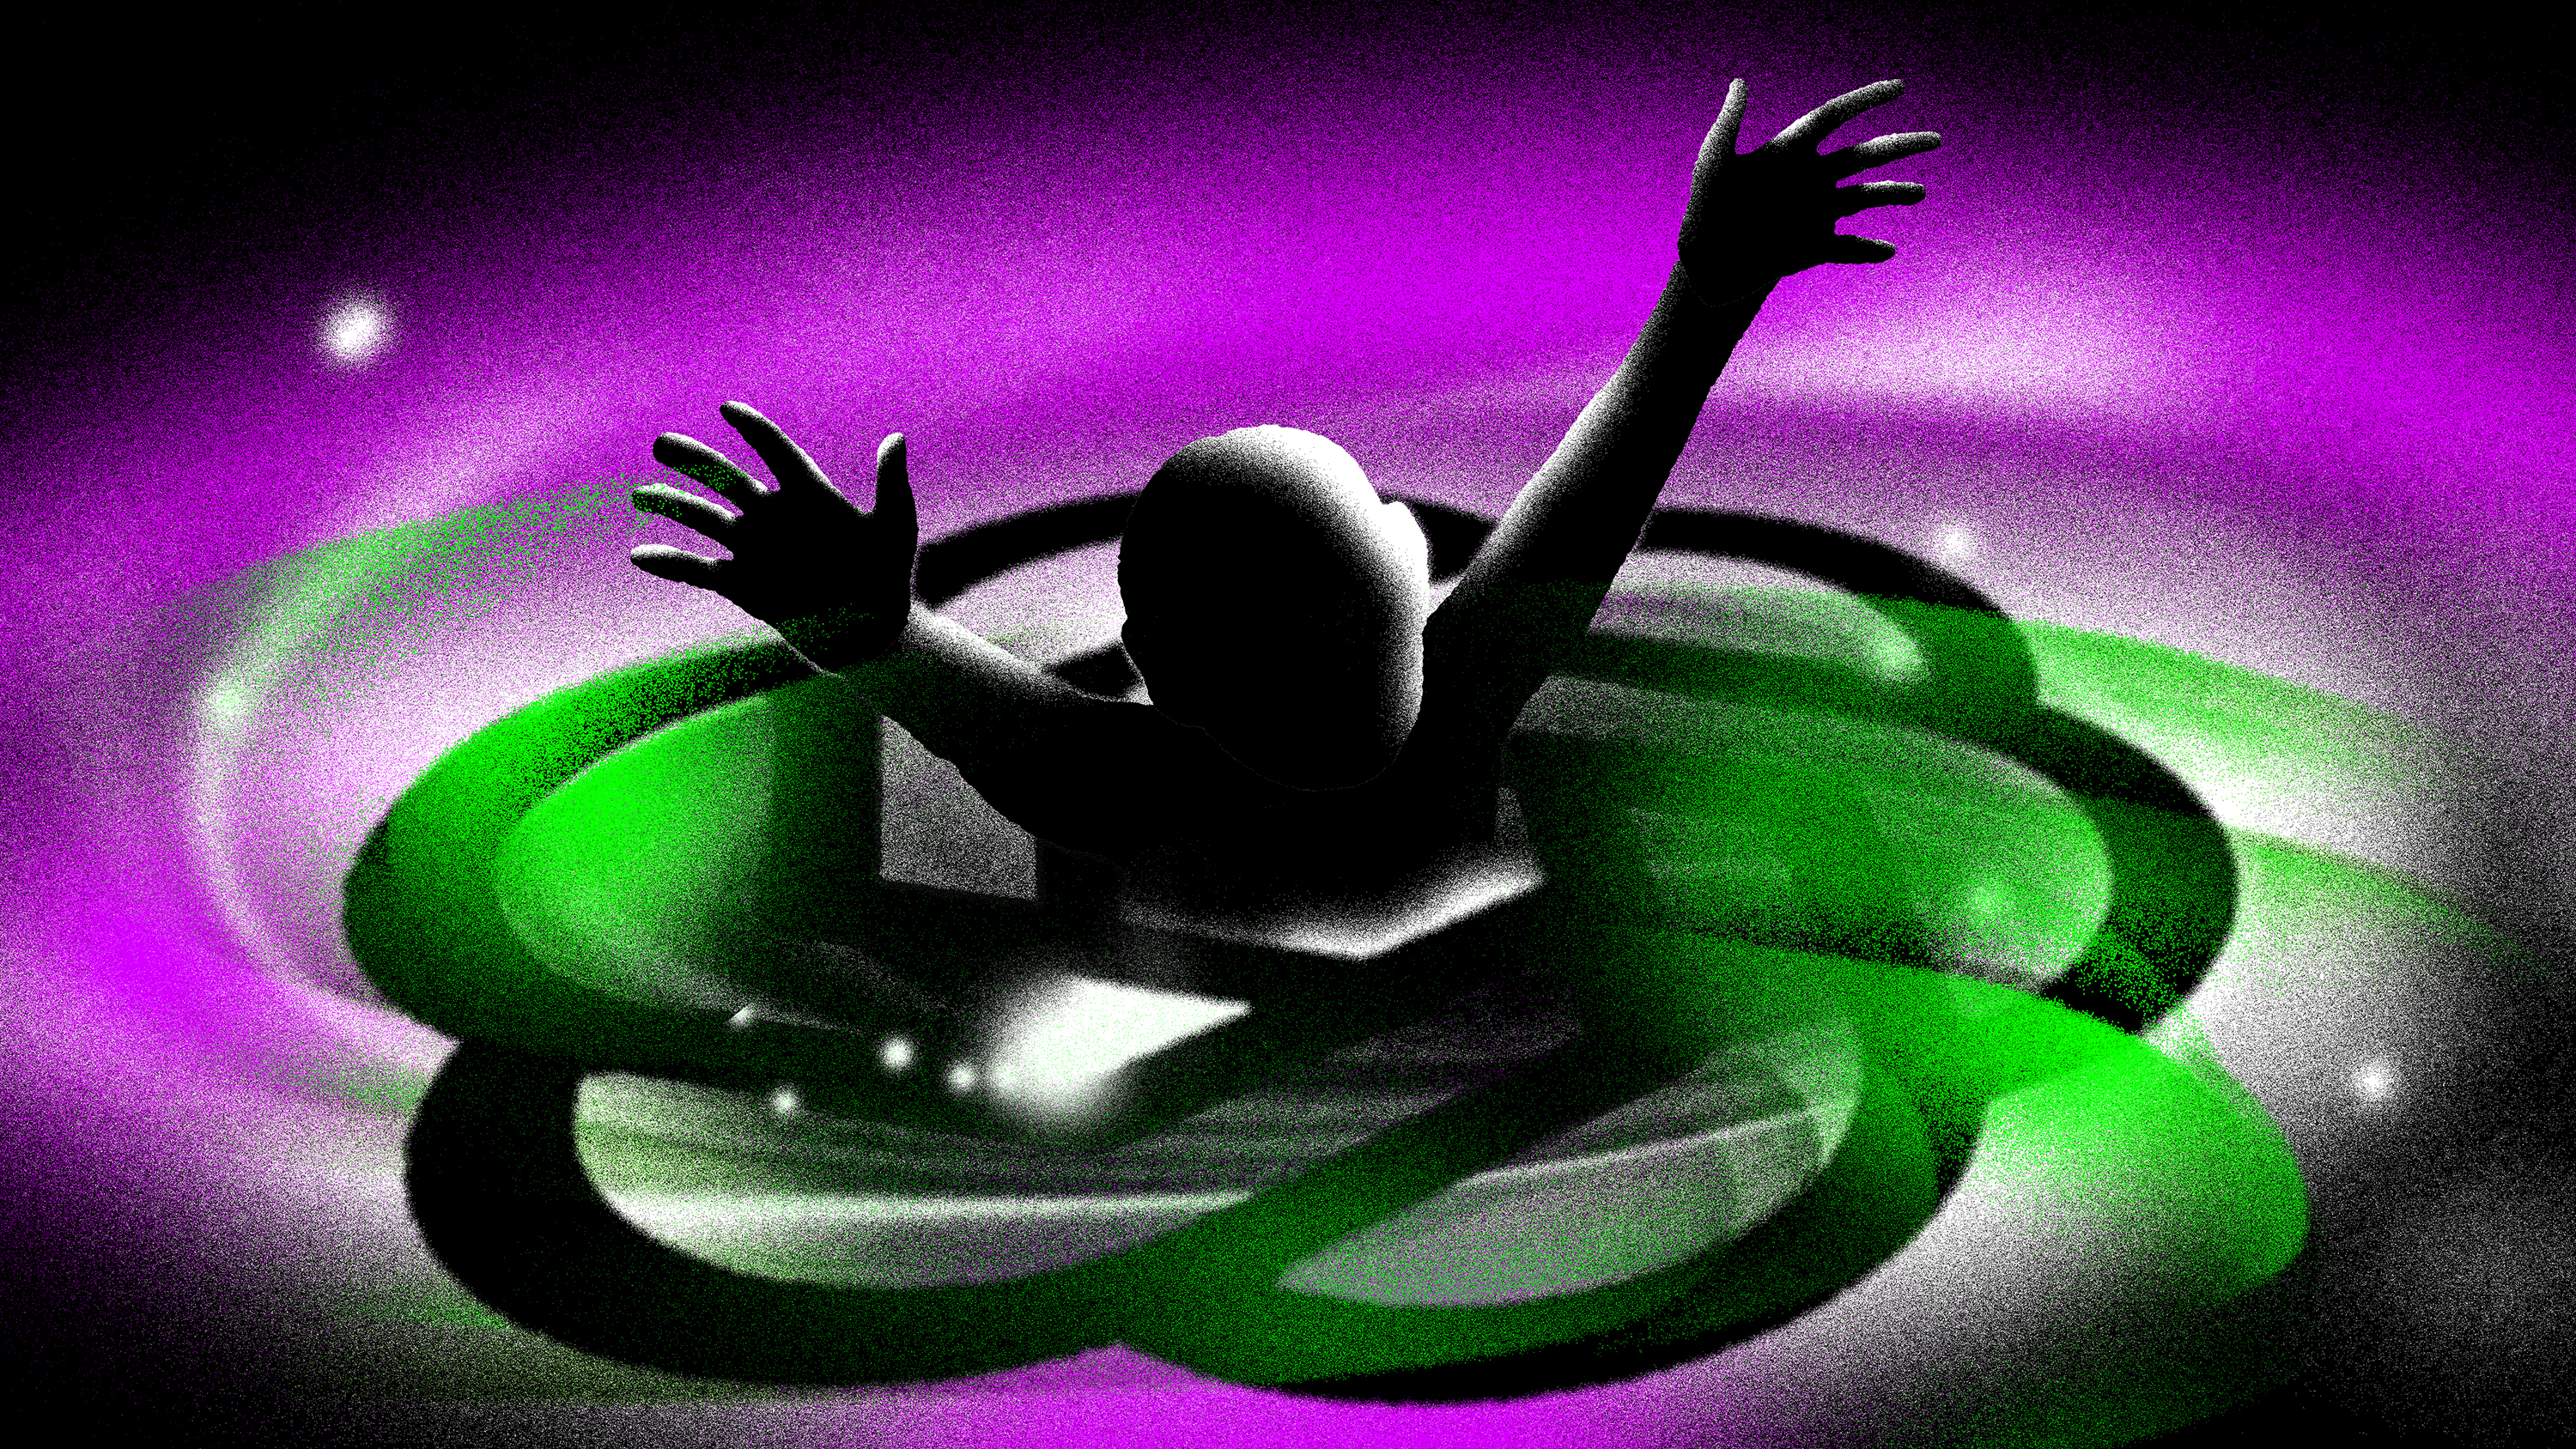 a stylized image of a person reaching up into the air.